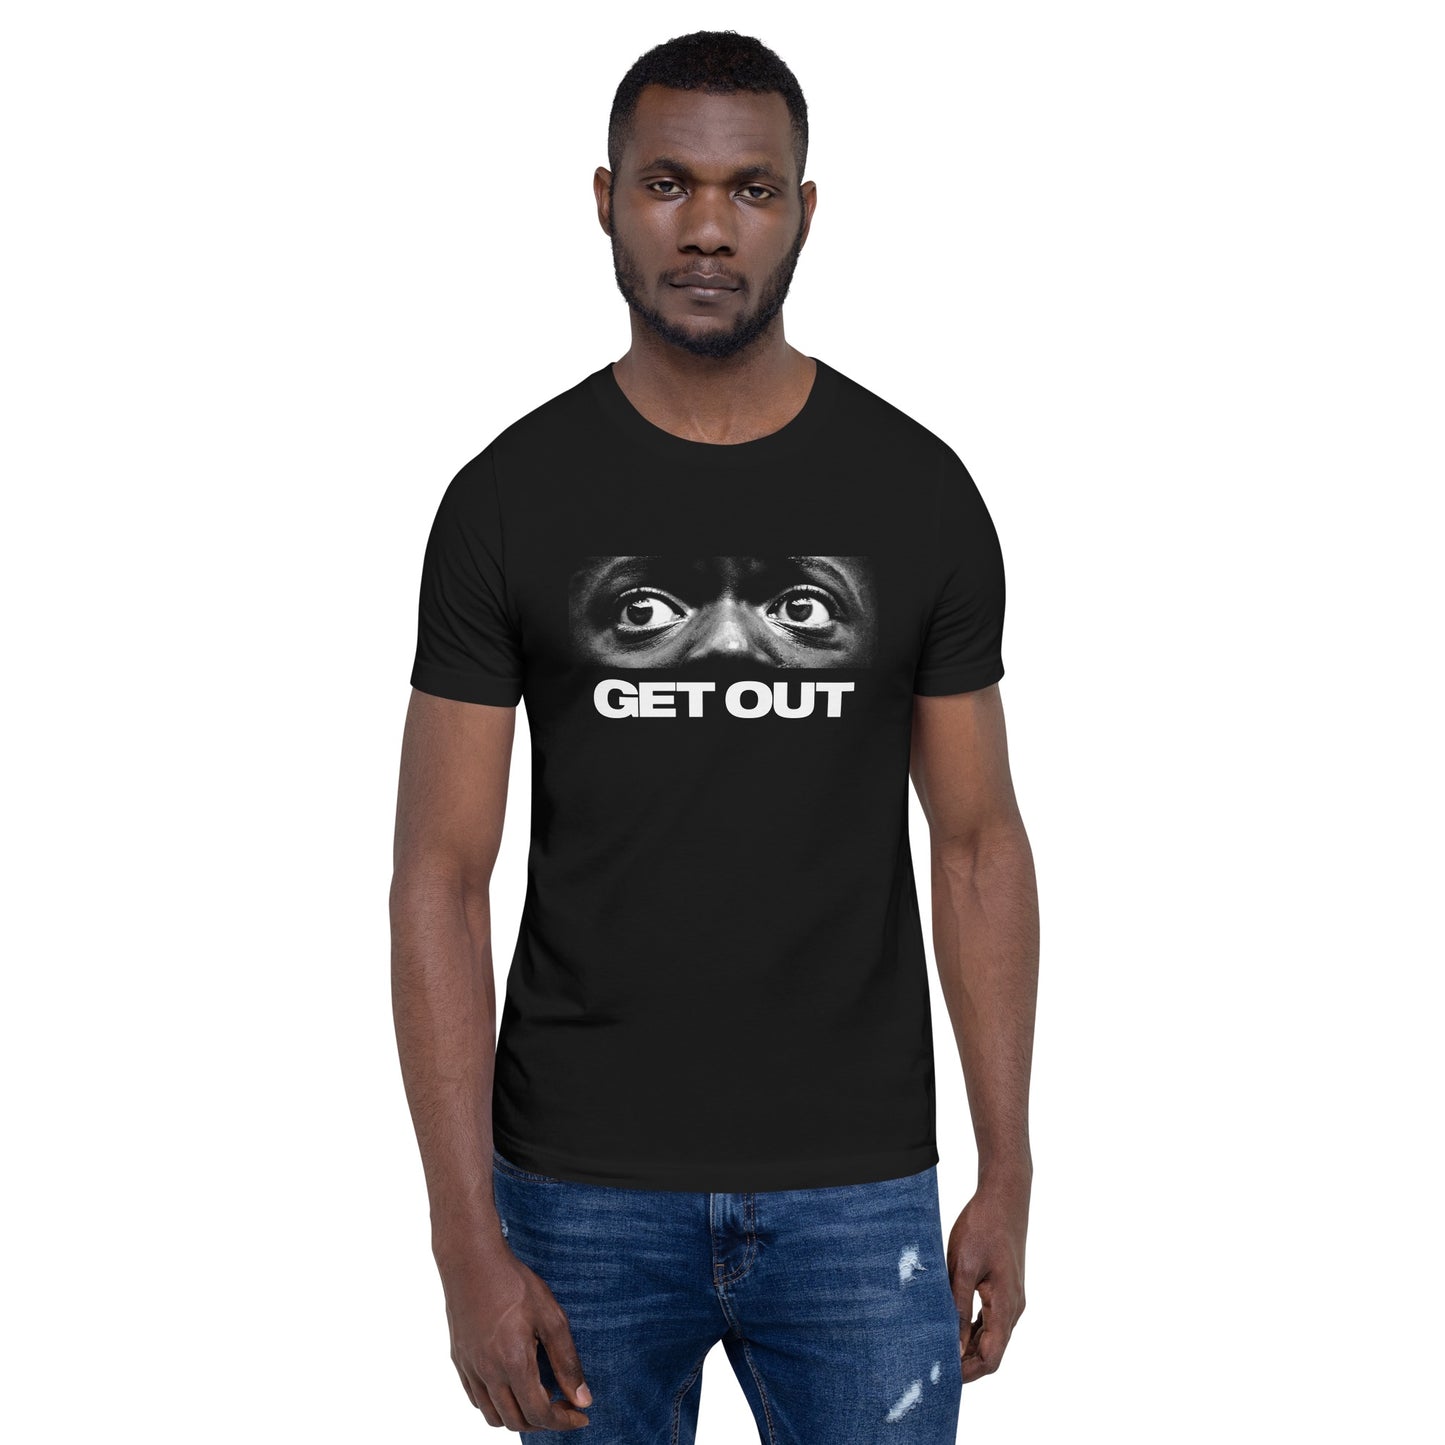 Get Out T-Shirt